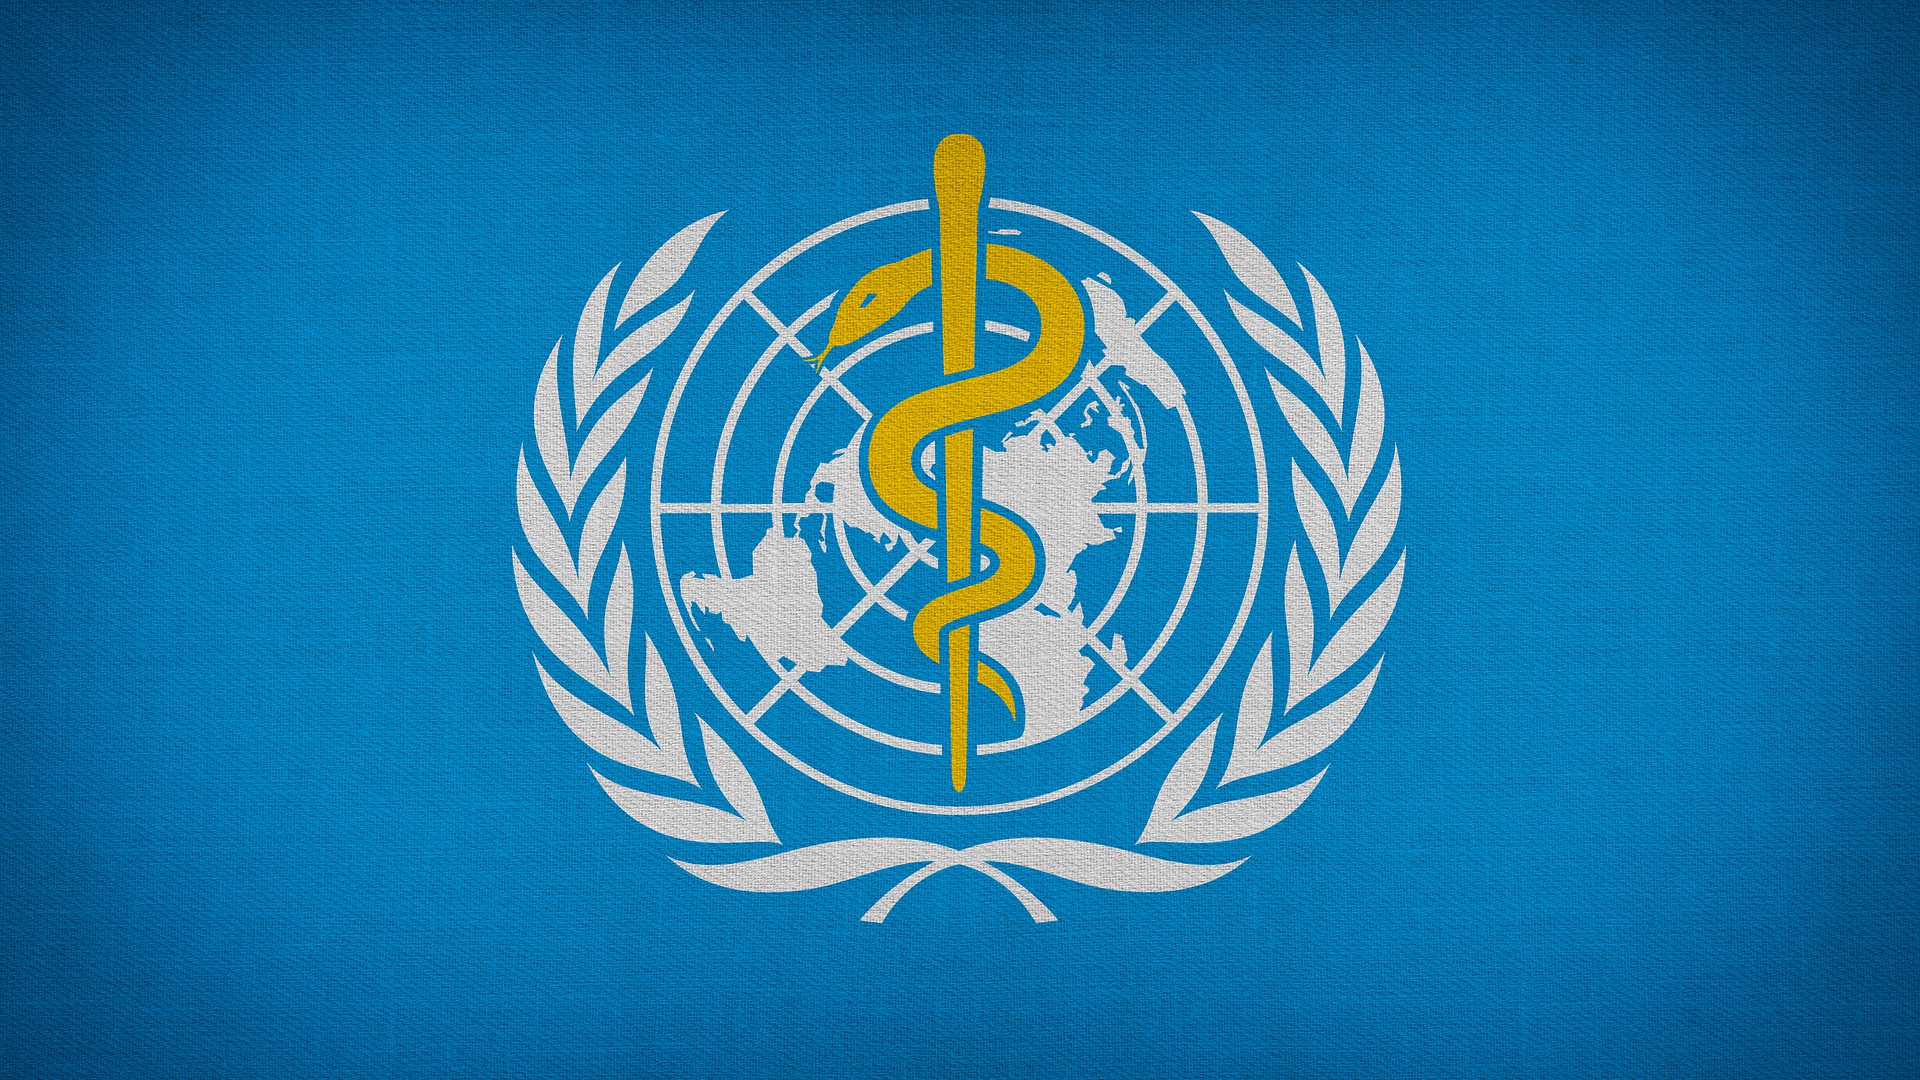 WHO launches Global Initiative on Digital Health